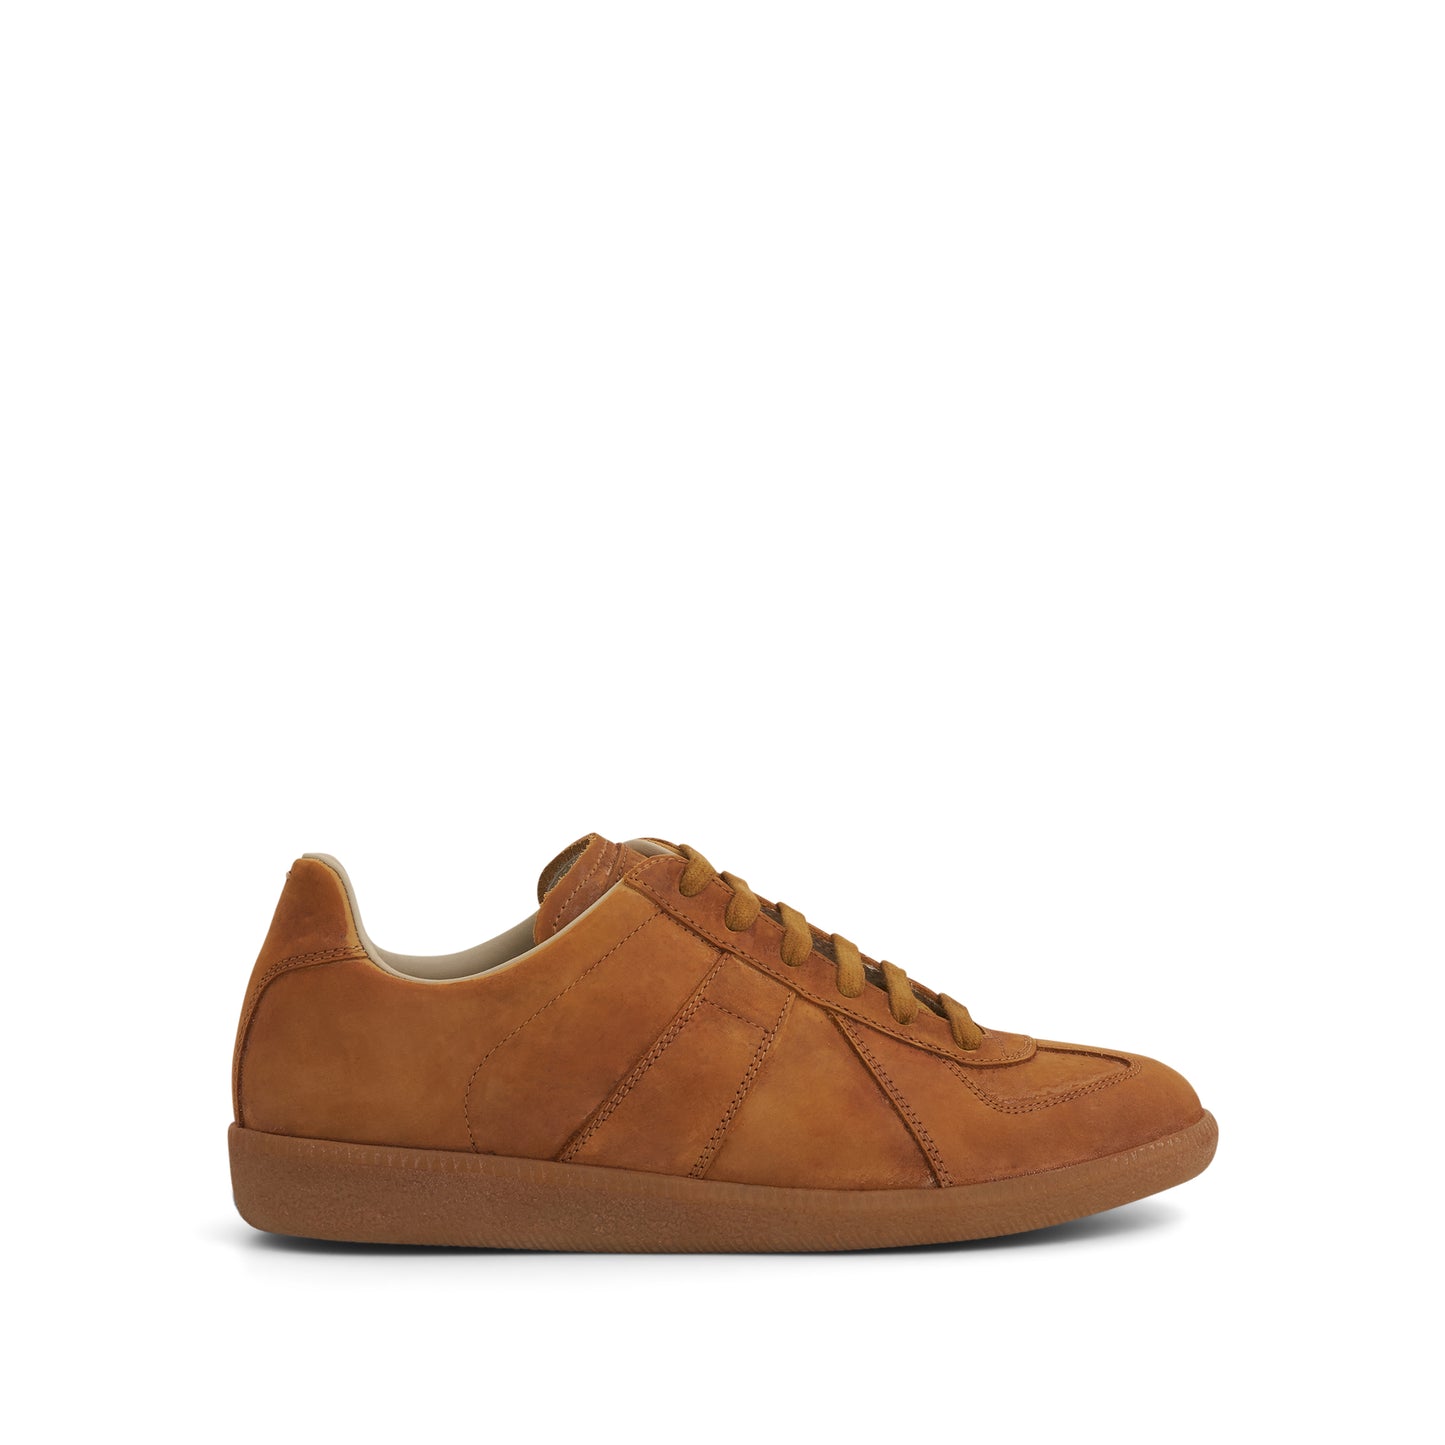 Replica Leather Sneakers in Old Camel